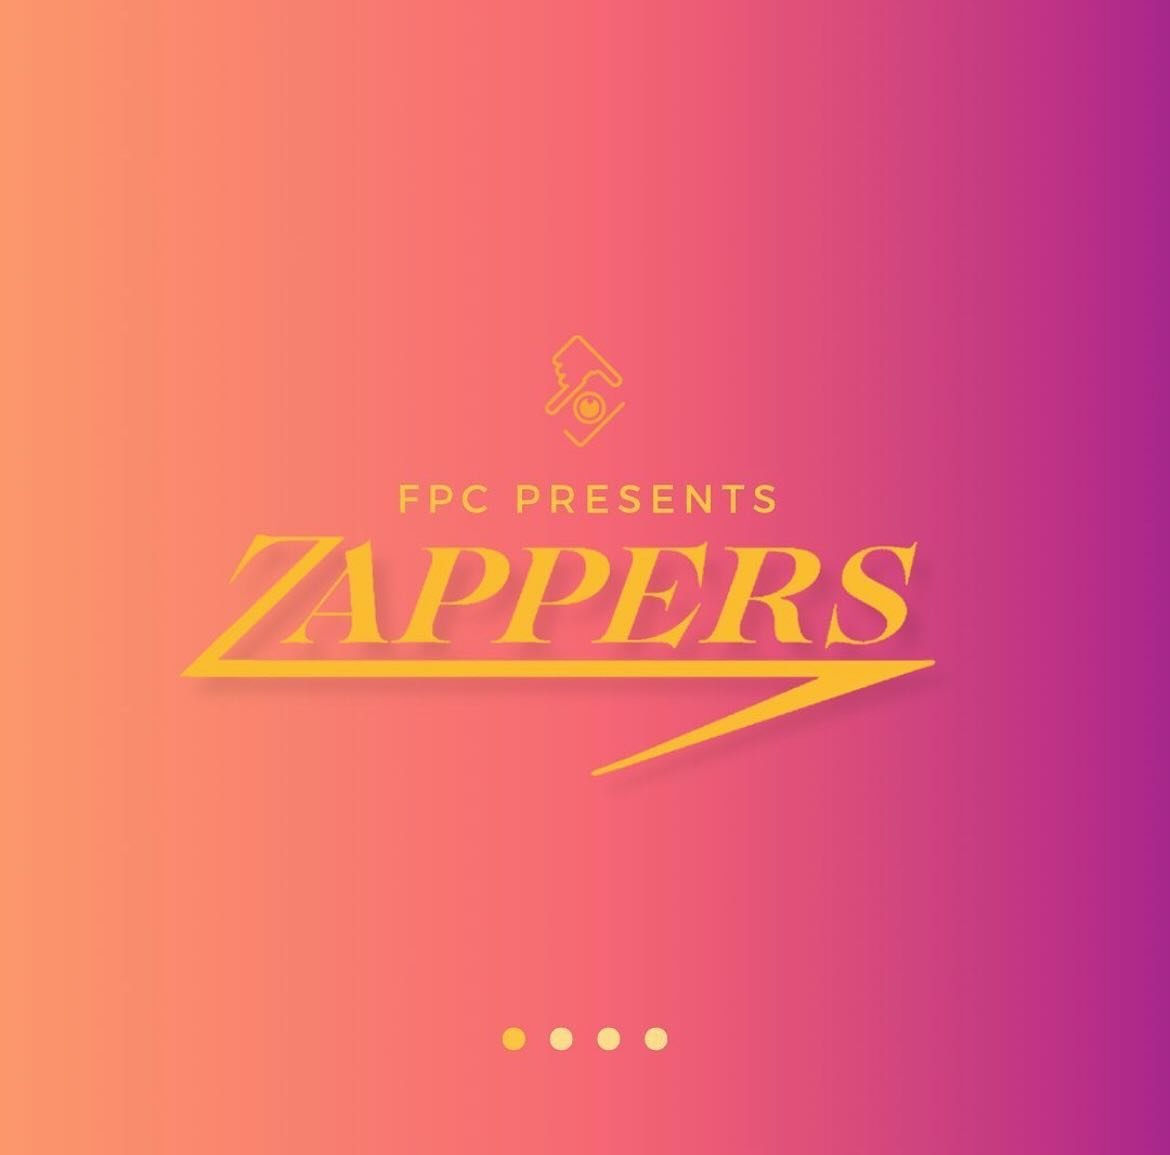 Tomorrow: Attend the Film Production Club&rsquo;s 4th annual Zappers! See student-made films, including the premier of the club&rsquo;s new film &ldquo;Every Age I&rsquo;ve Ever Been&rdquo;!

APRIL 26th - FMAD AUDITORIUM
RED CARPET @ 5:30 PM 
SHOWING